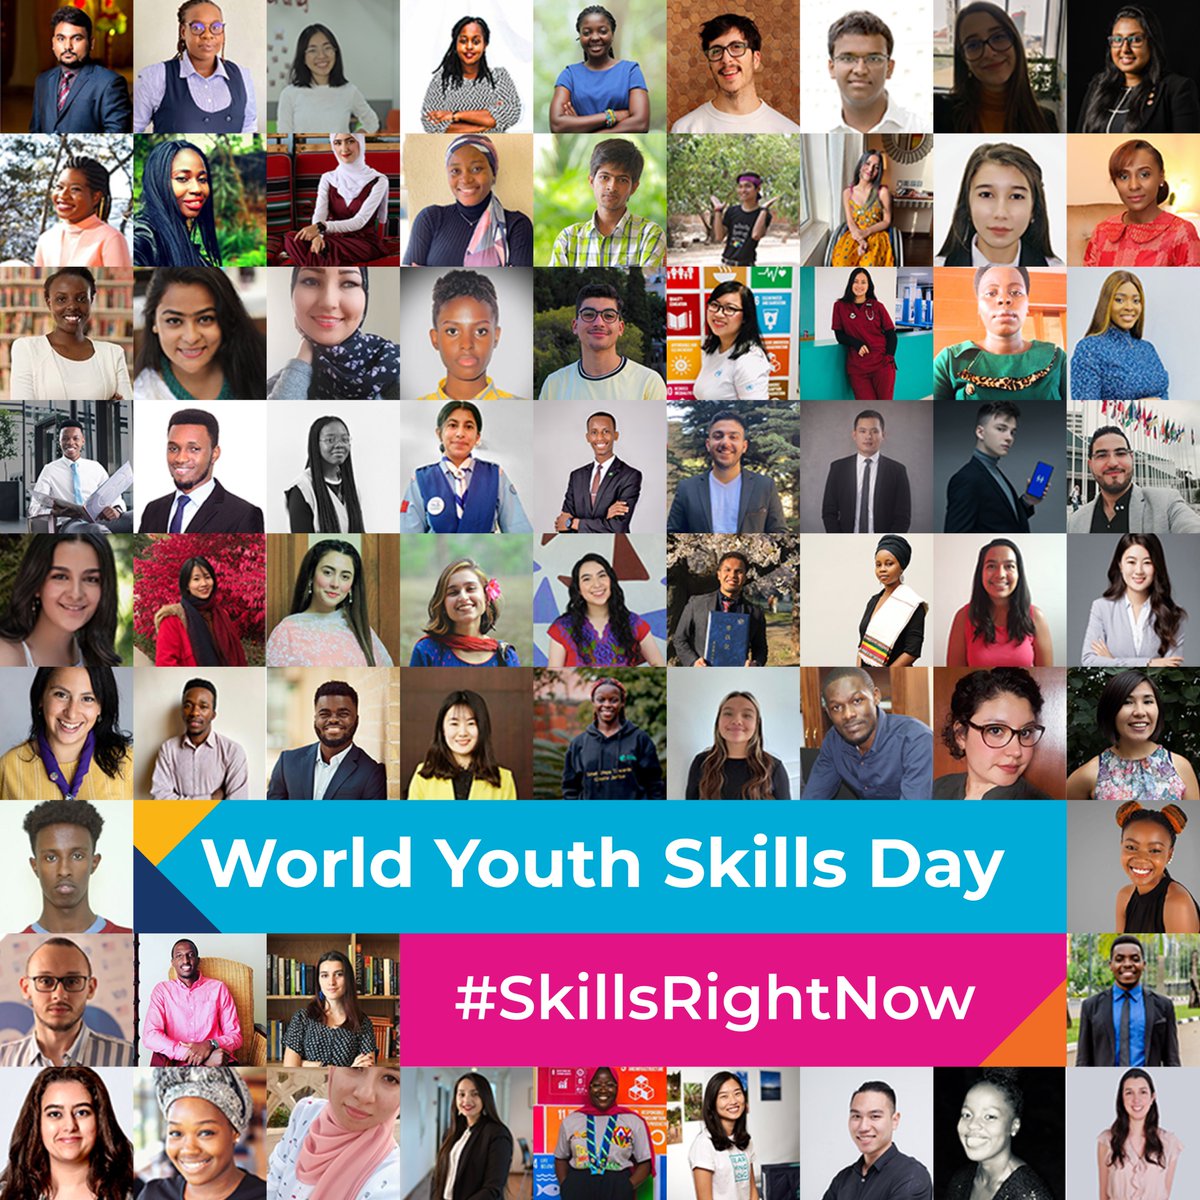 Young people are the leaders of today and the future.

Let’s mark Saturday's #YouthSkillsDay by recognizing their many contributions, and commit to supporting youth with the right #SkillsRightNow to shape a better tomorrow for all generations. un.org/en/observances…